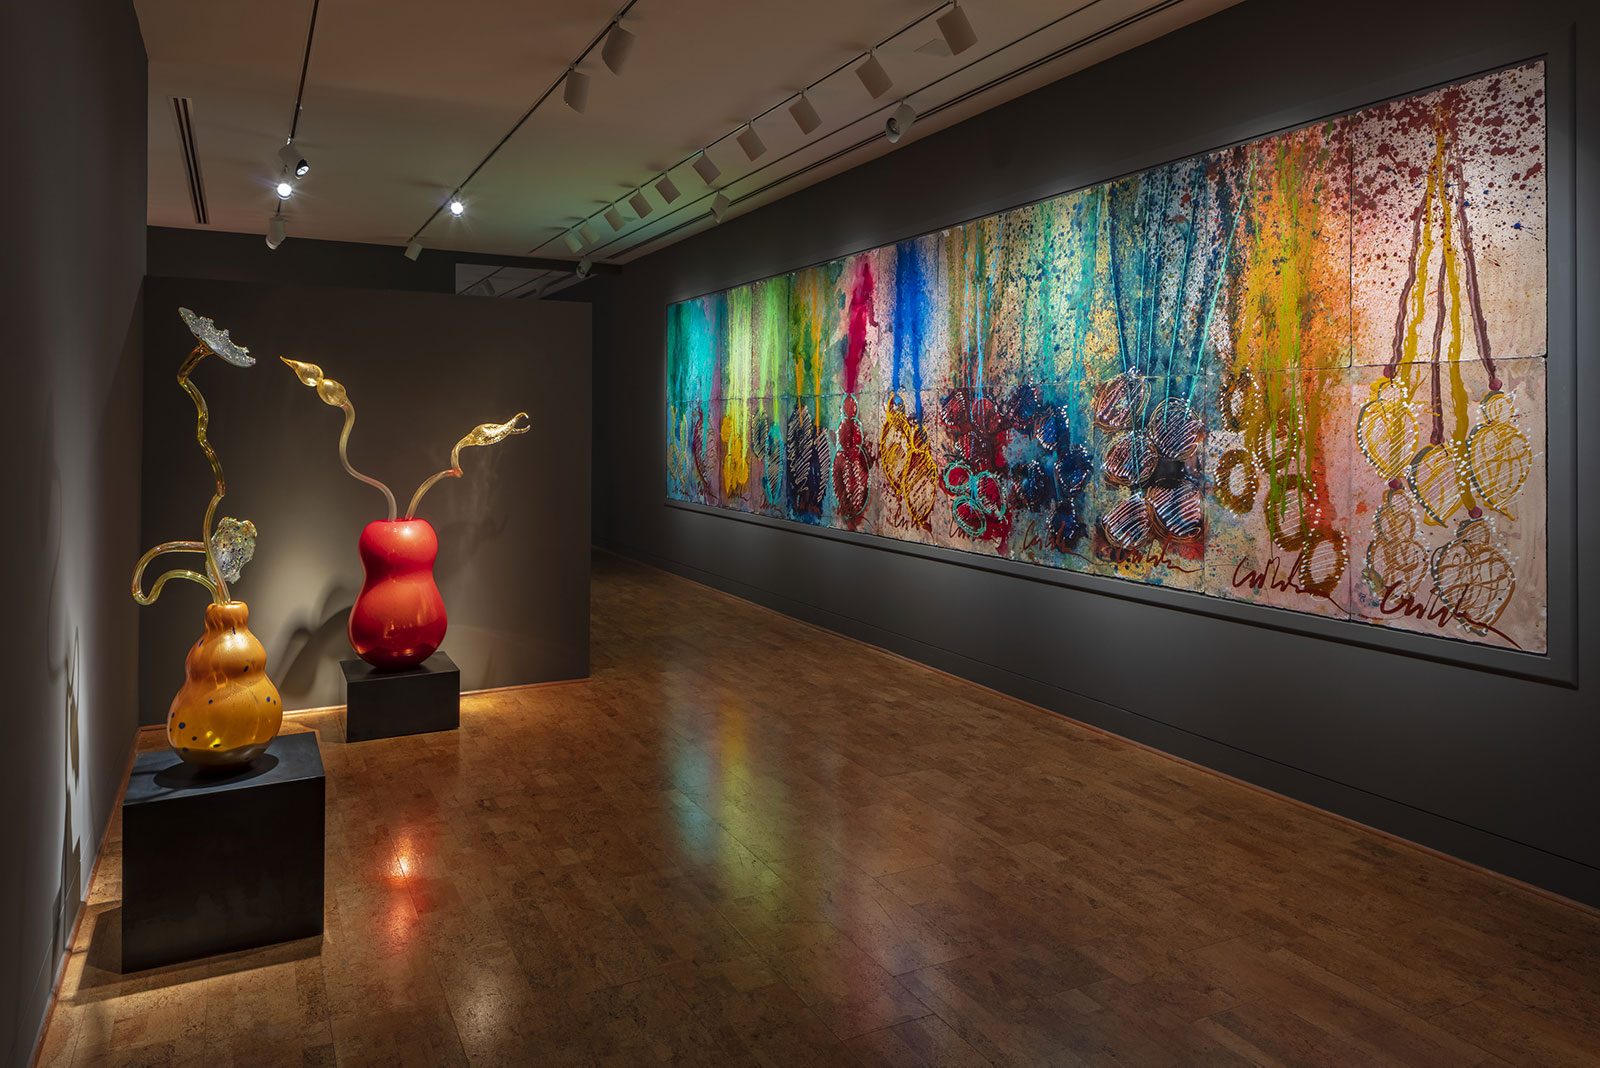 Ikebana (2002-12) and Ikebana Doppio Drawing Suite #9 (2001) by Dale Chihuly